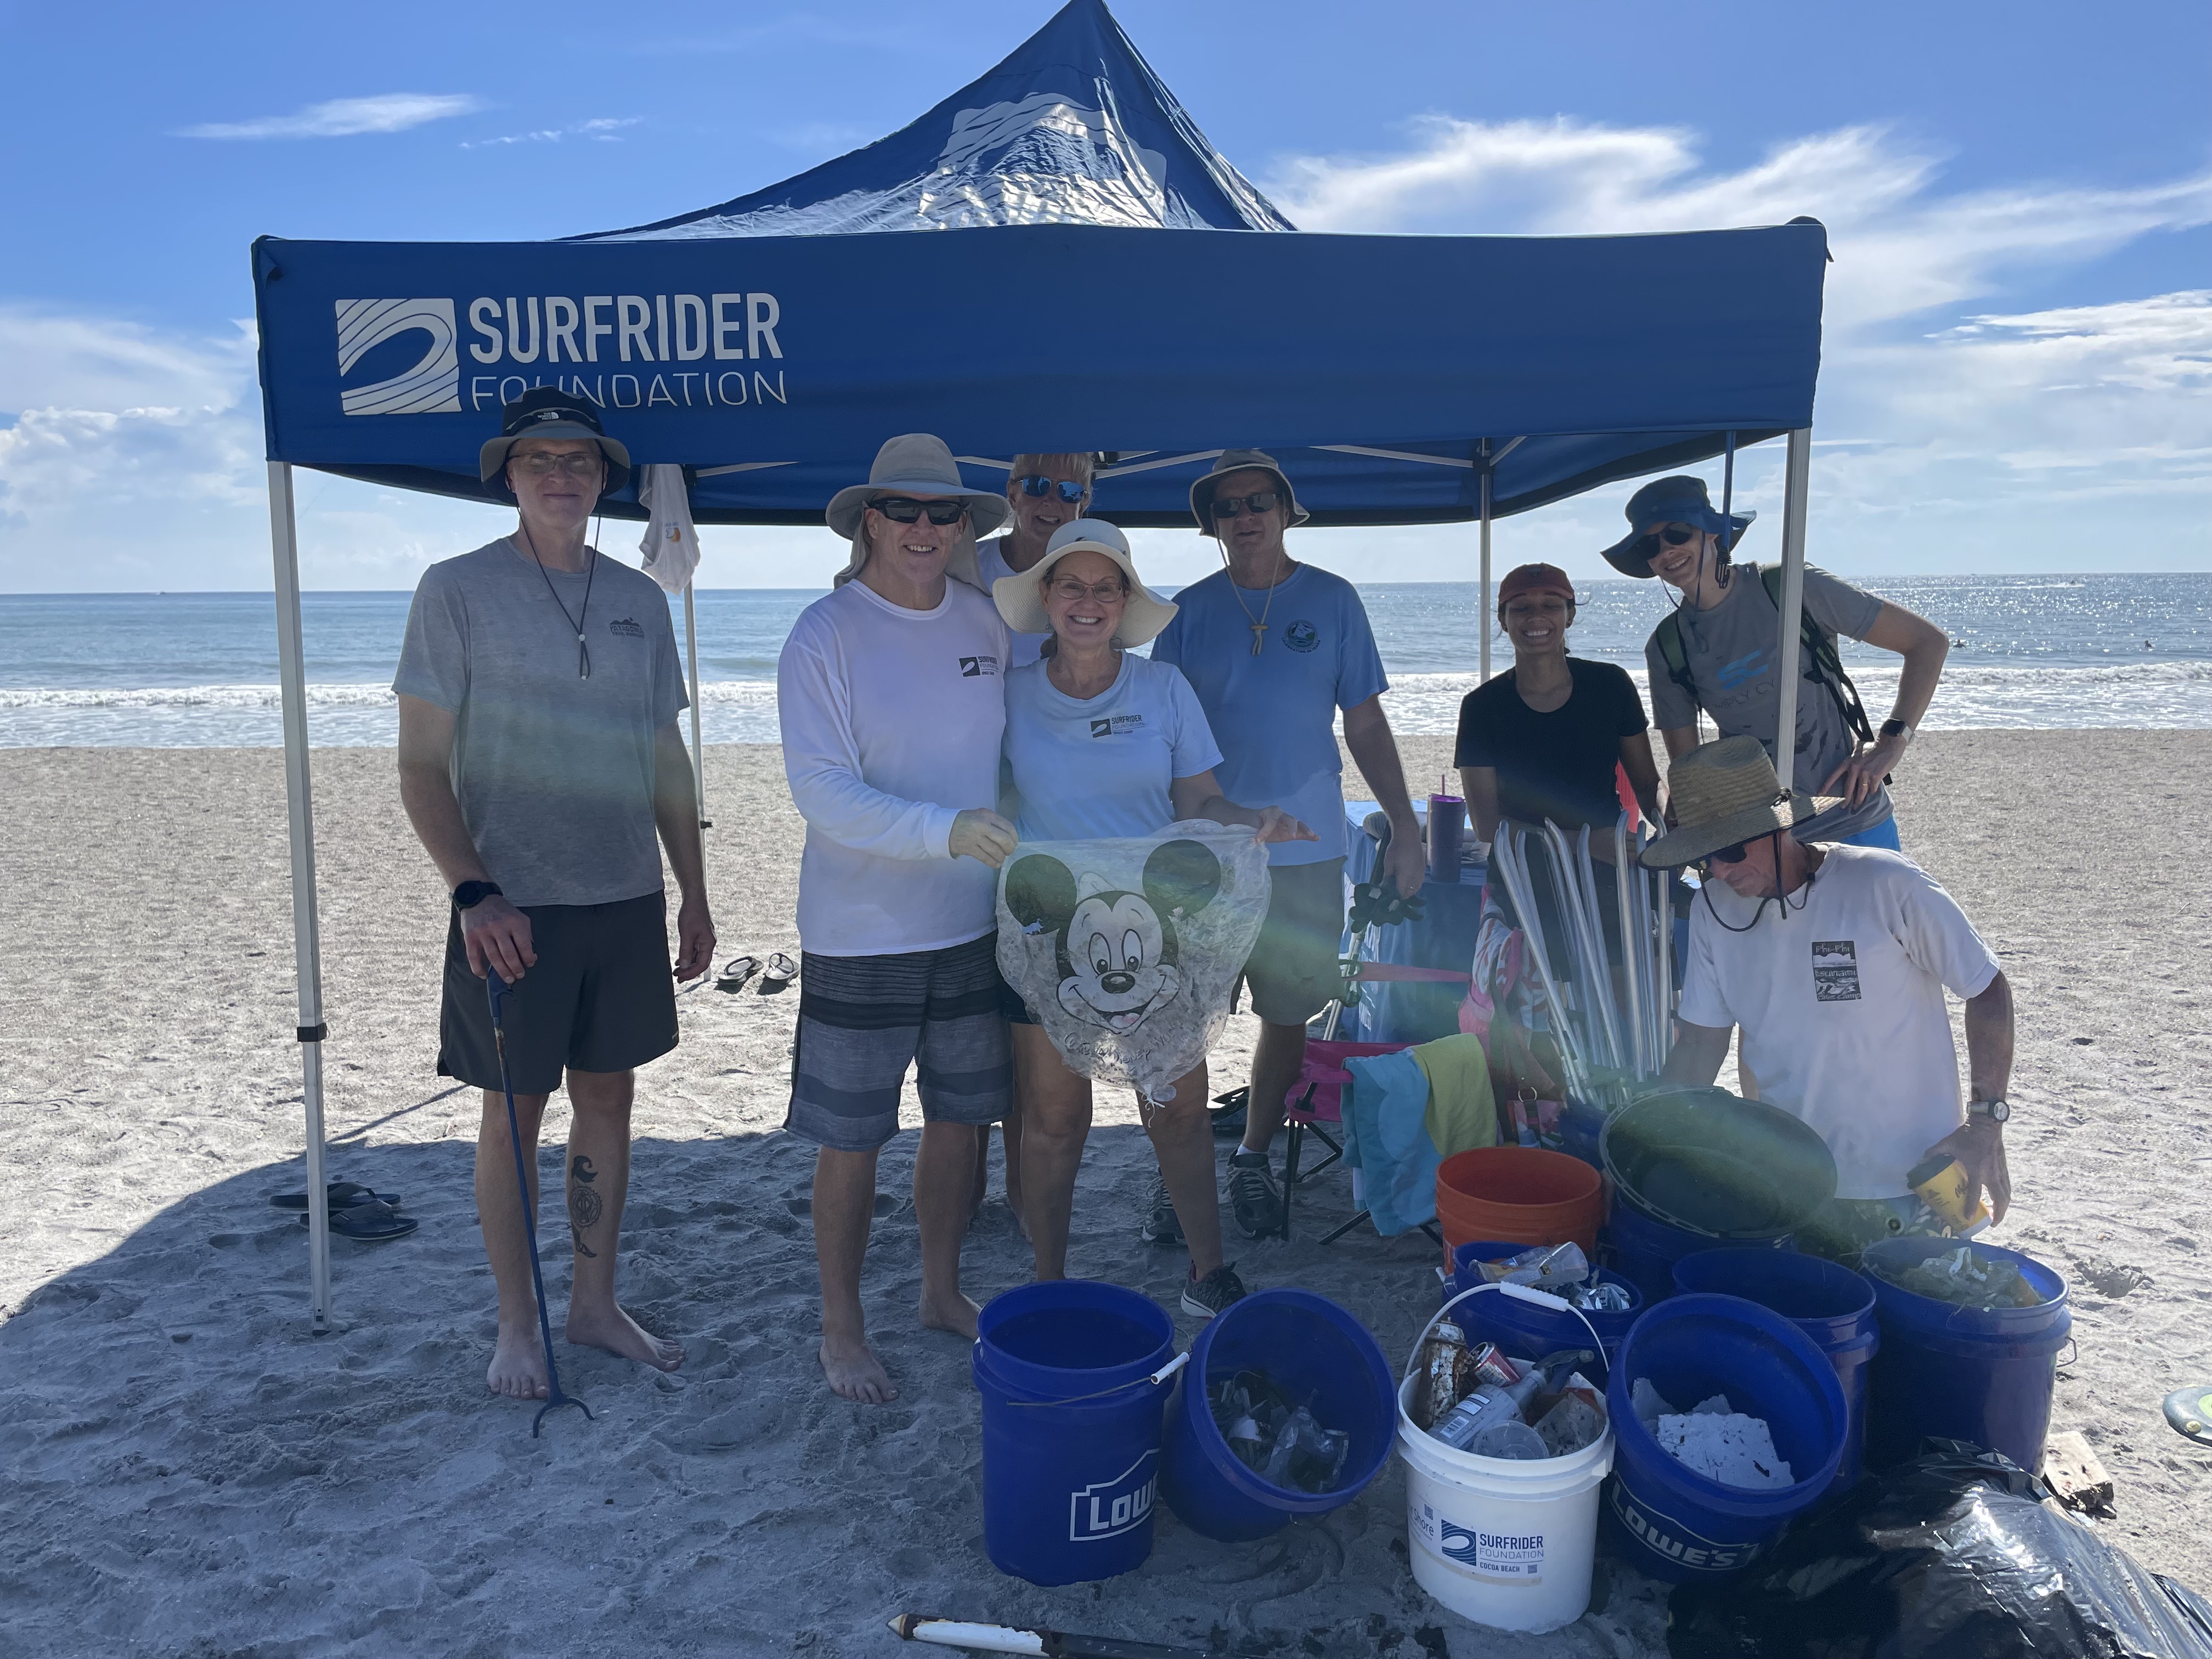 Group of volunteers on the beach with beach cleanup tools, standing under a blue tent with the Surfrider logo on it